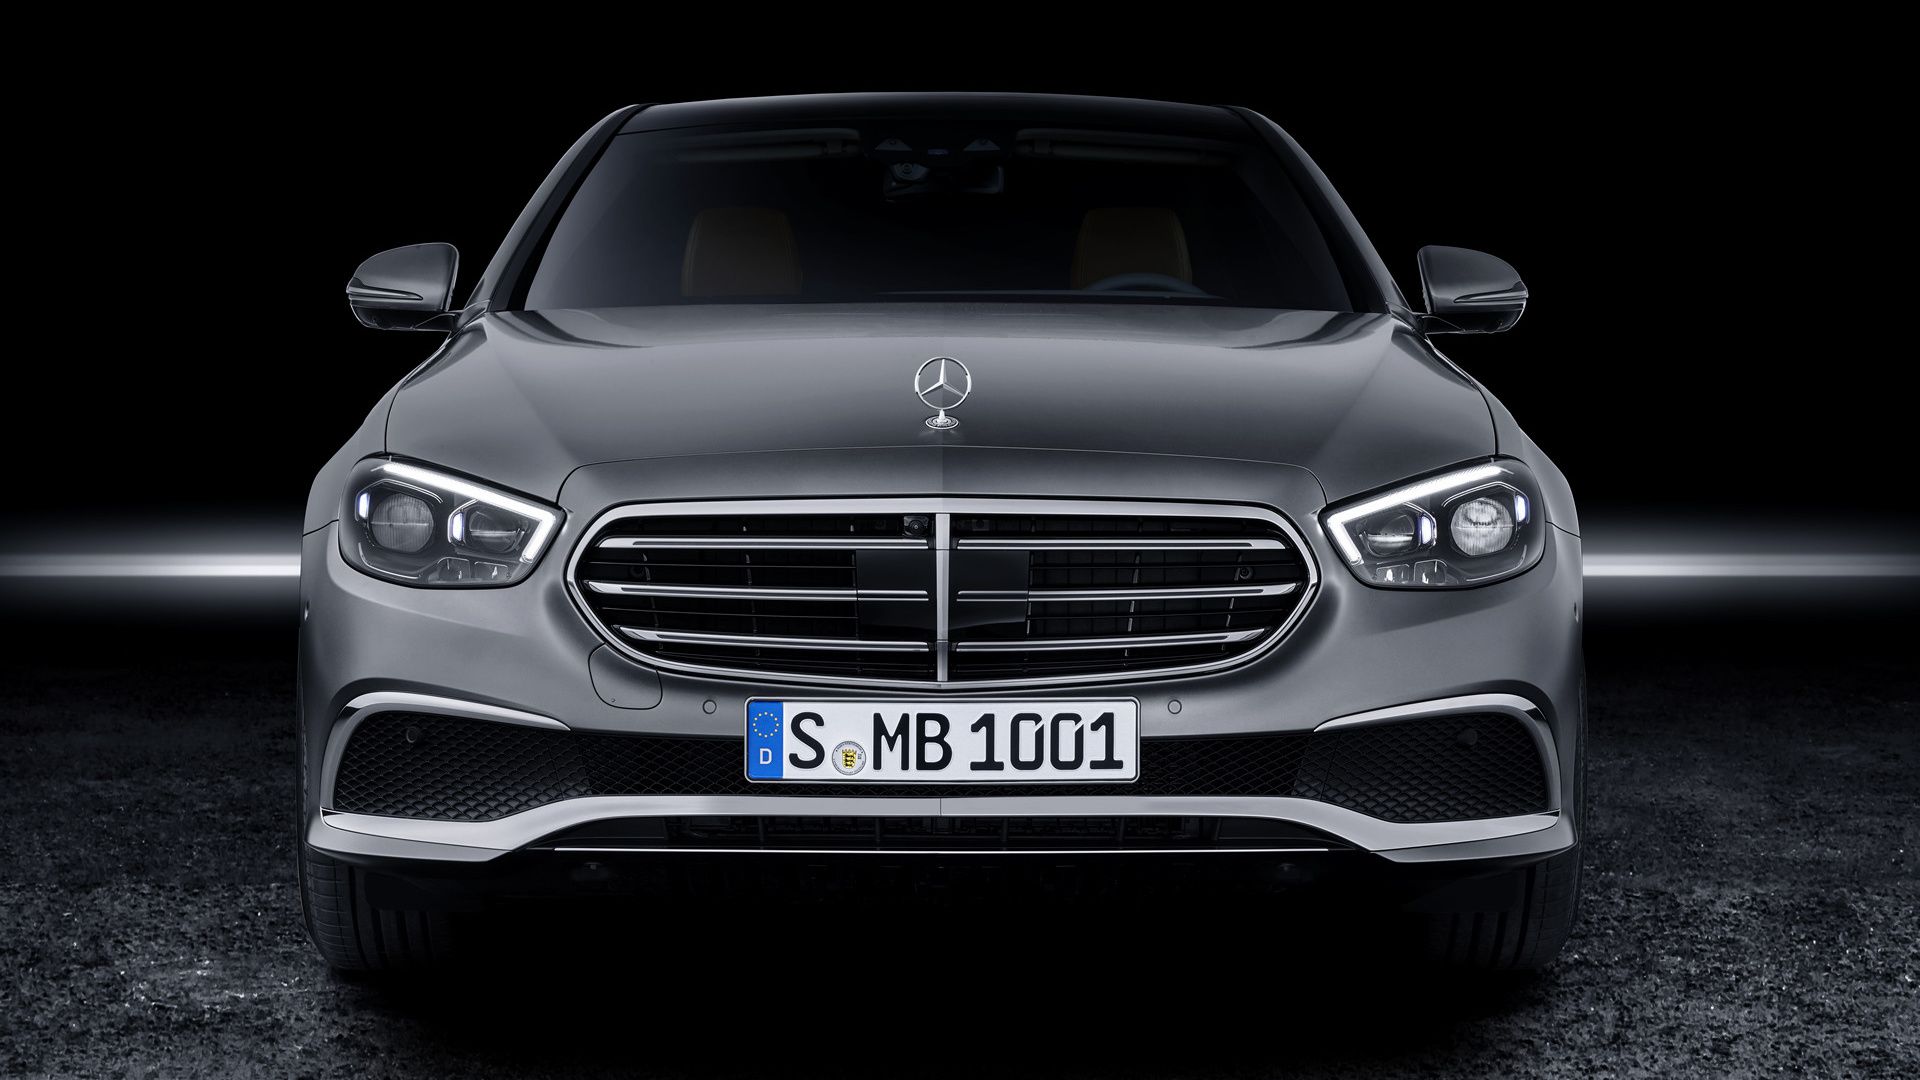 Mercedes Benz E Class And HD Image